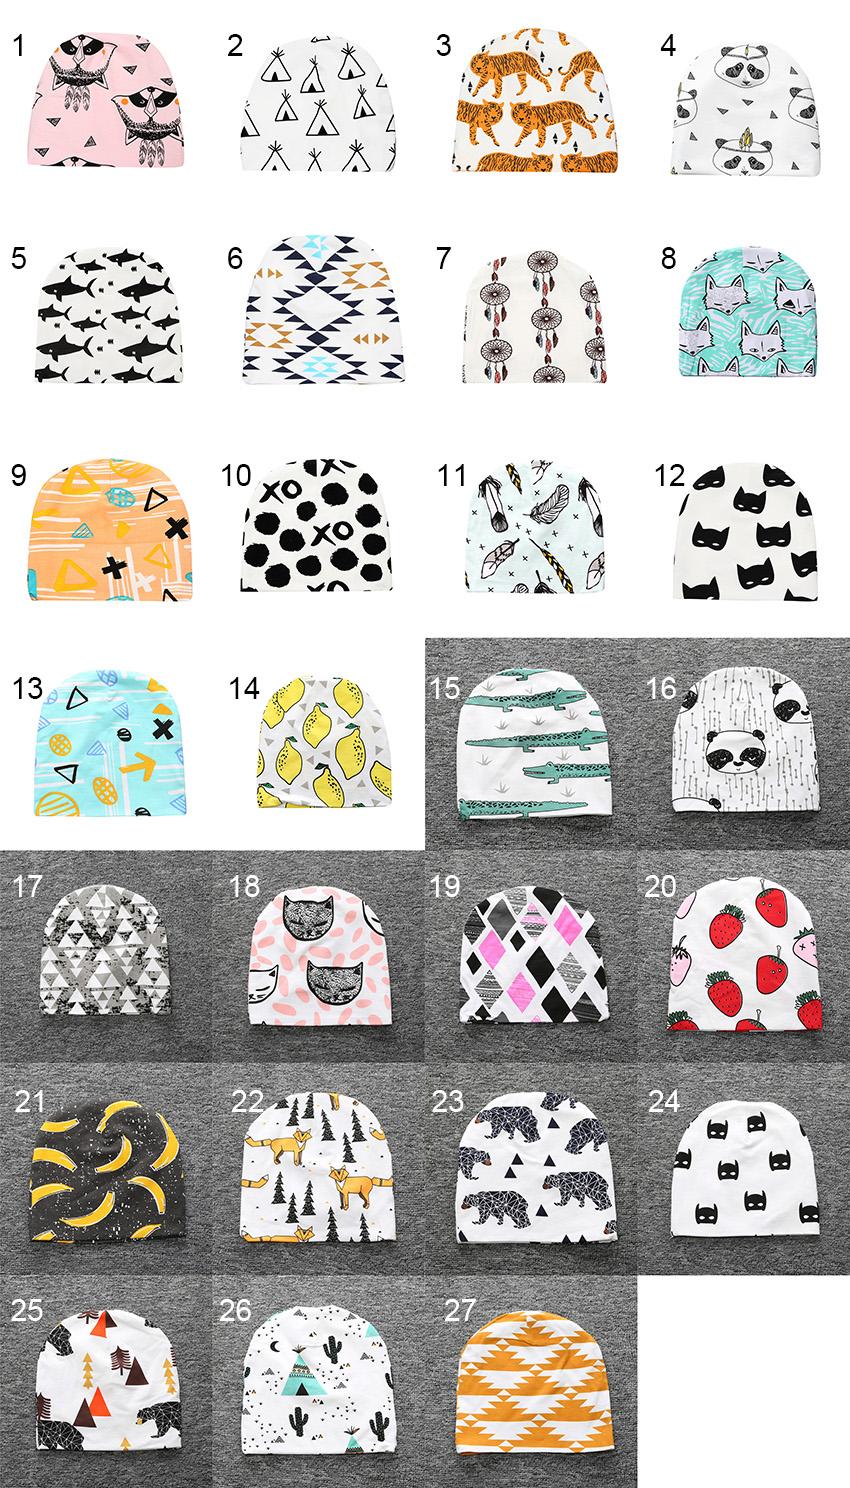 Kids Caps Children's Hats 27 Designs Spring Autumn Fitted Hat Cartoon Printed Hats Cotton Sombreros Chapeau for Boy Girl 0-3T